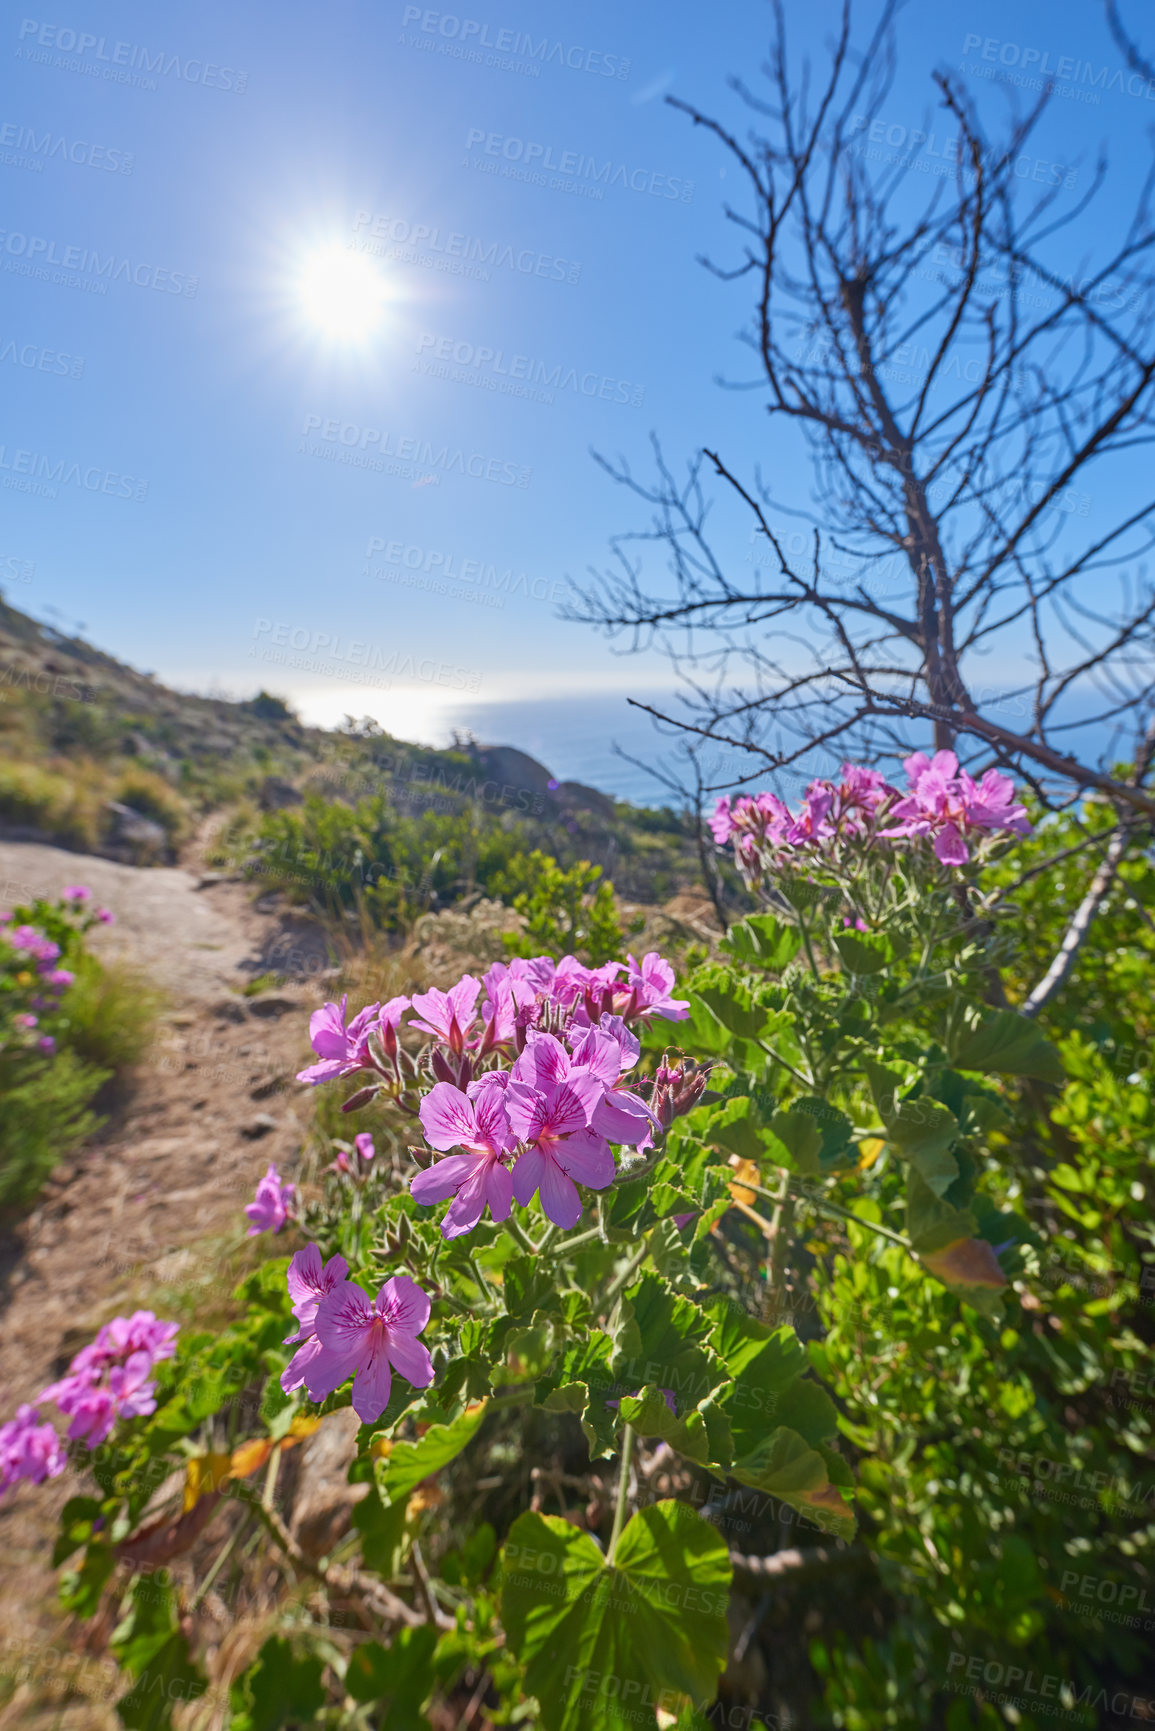 Buy stock photo Beautiful pelargonium flowers on a hiking trail with a blue sky, sunshine and ocean in the background. Many purple, pink and green cranesbill flowering plants on a nature explore path with copy space